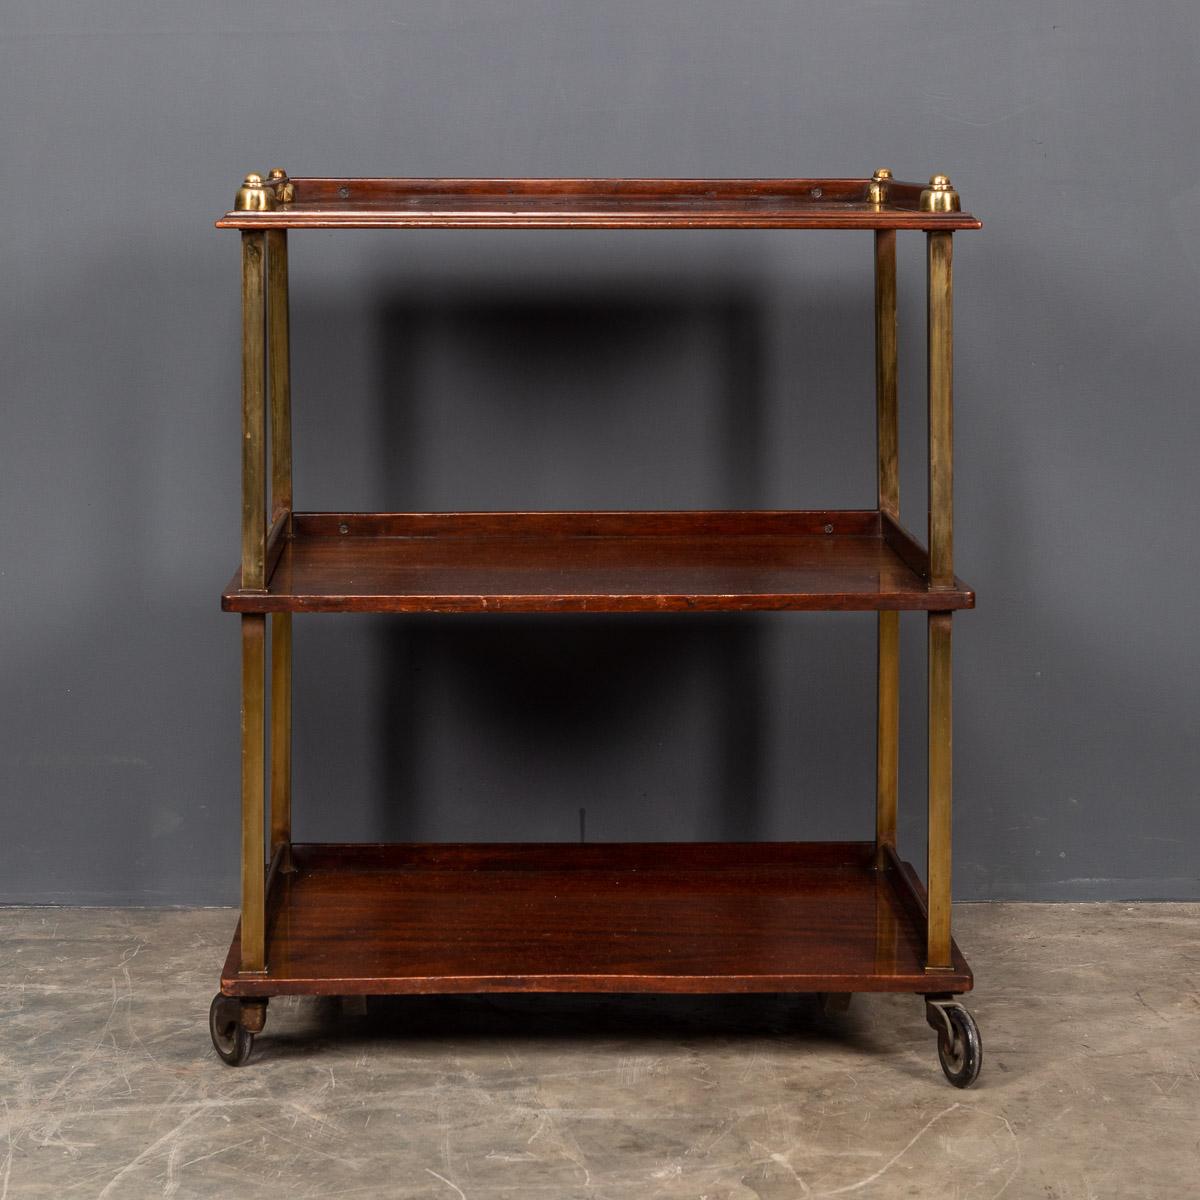 Stylish early-20th century Art Deco three-tier brass and mahogany drinks trolley. A must have for any sophisticated cocktail party.

Condition

In good condition - some wear consistent with age.

Size

Height: 76cm
Width: 63cm
Depth: 42cm.